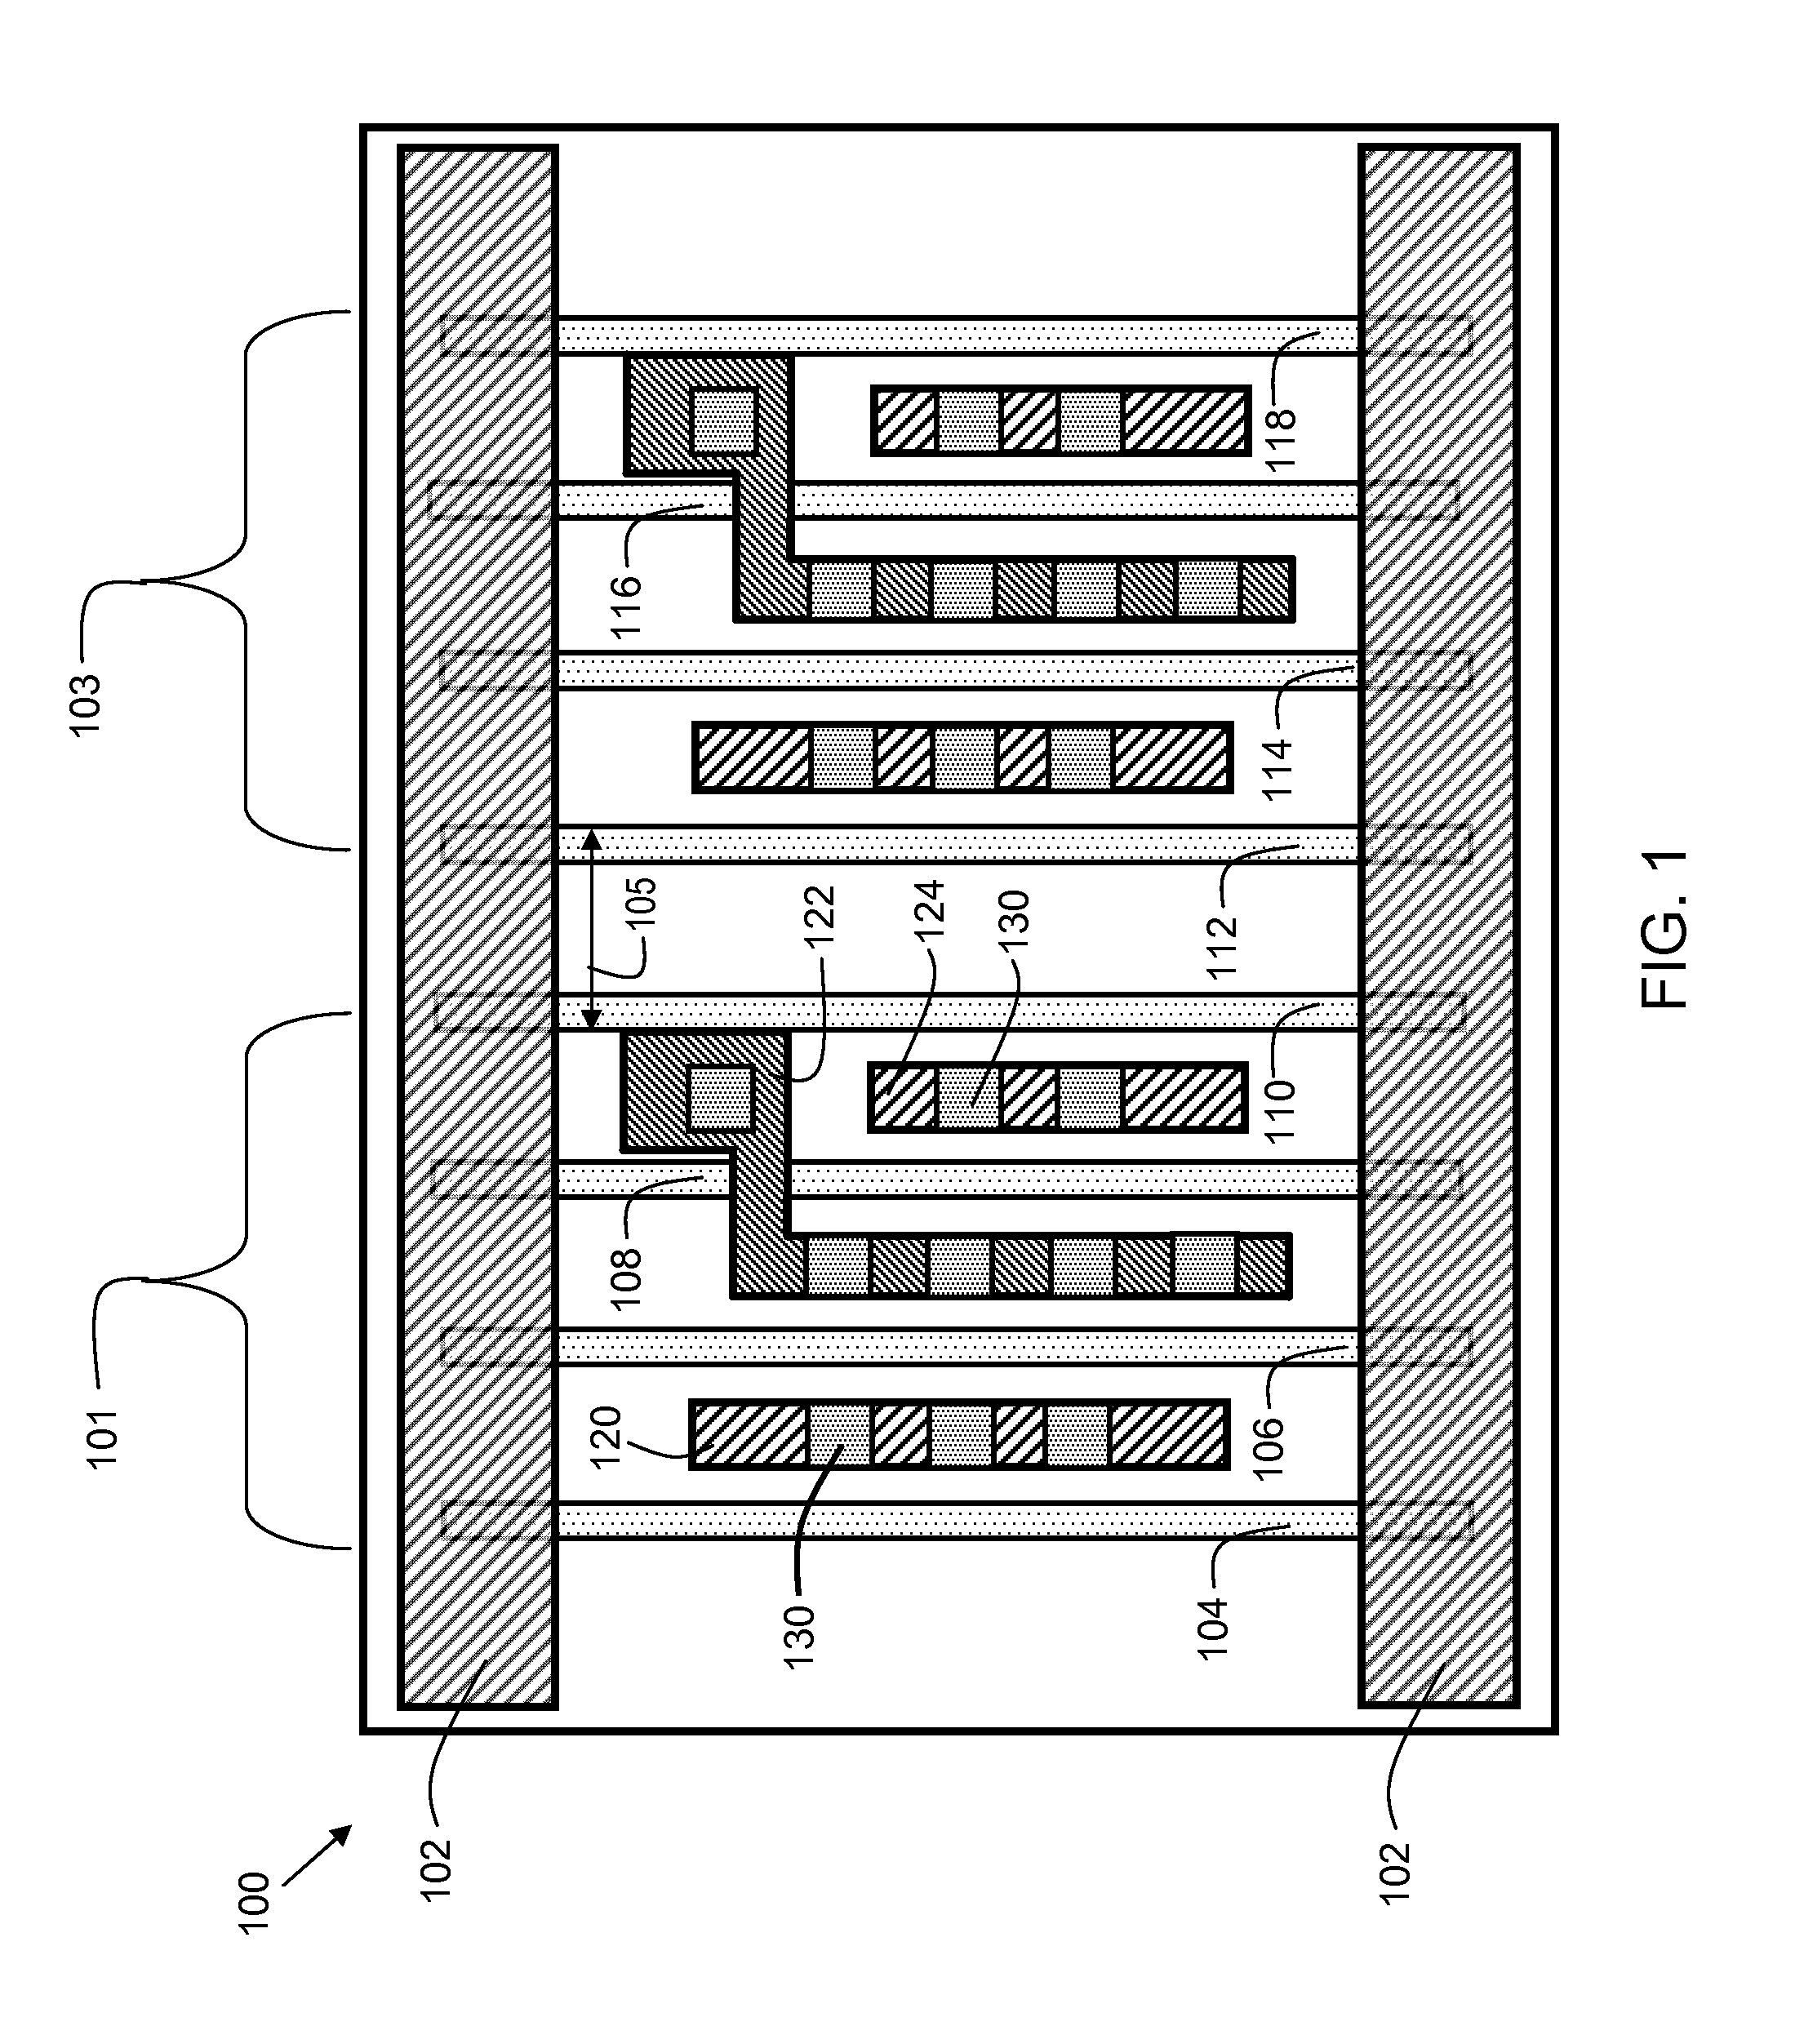 Methods for improving double patterning route efficiency